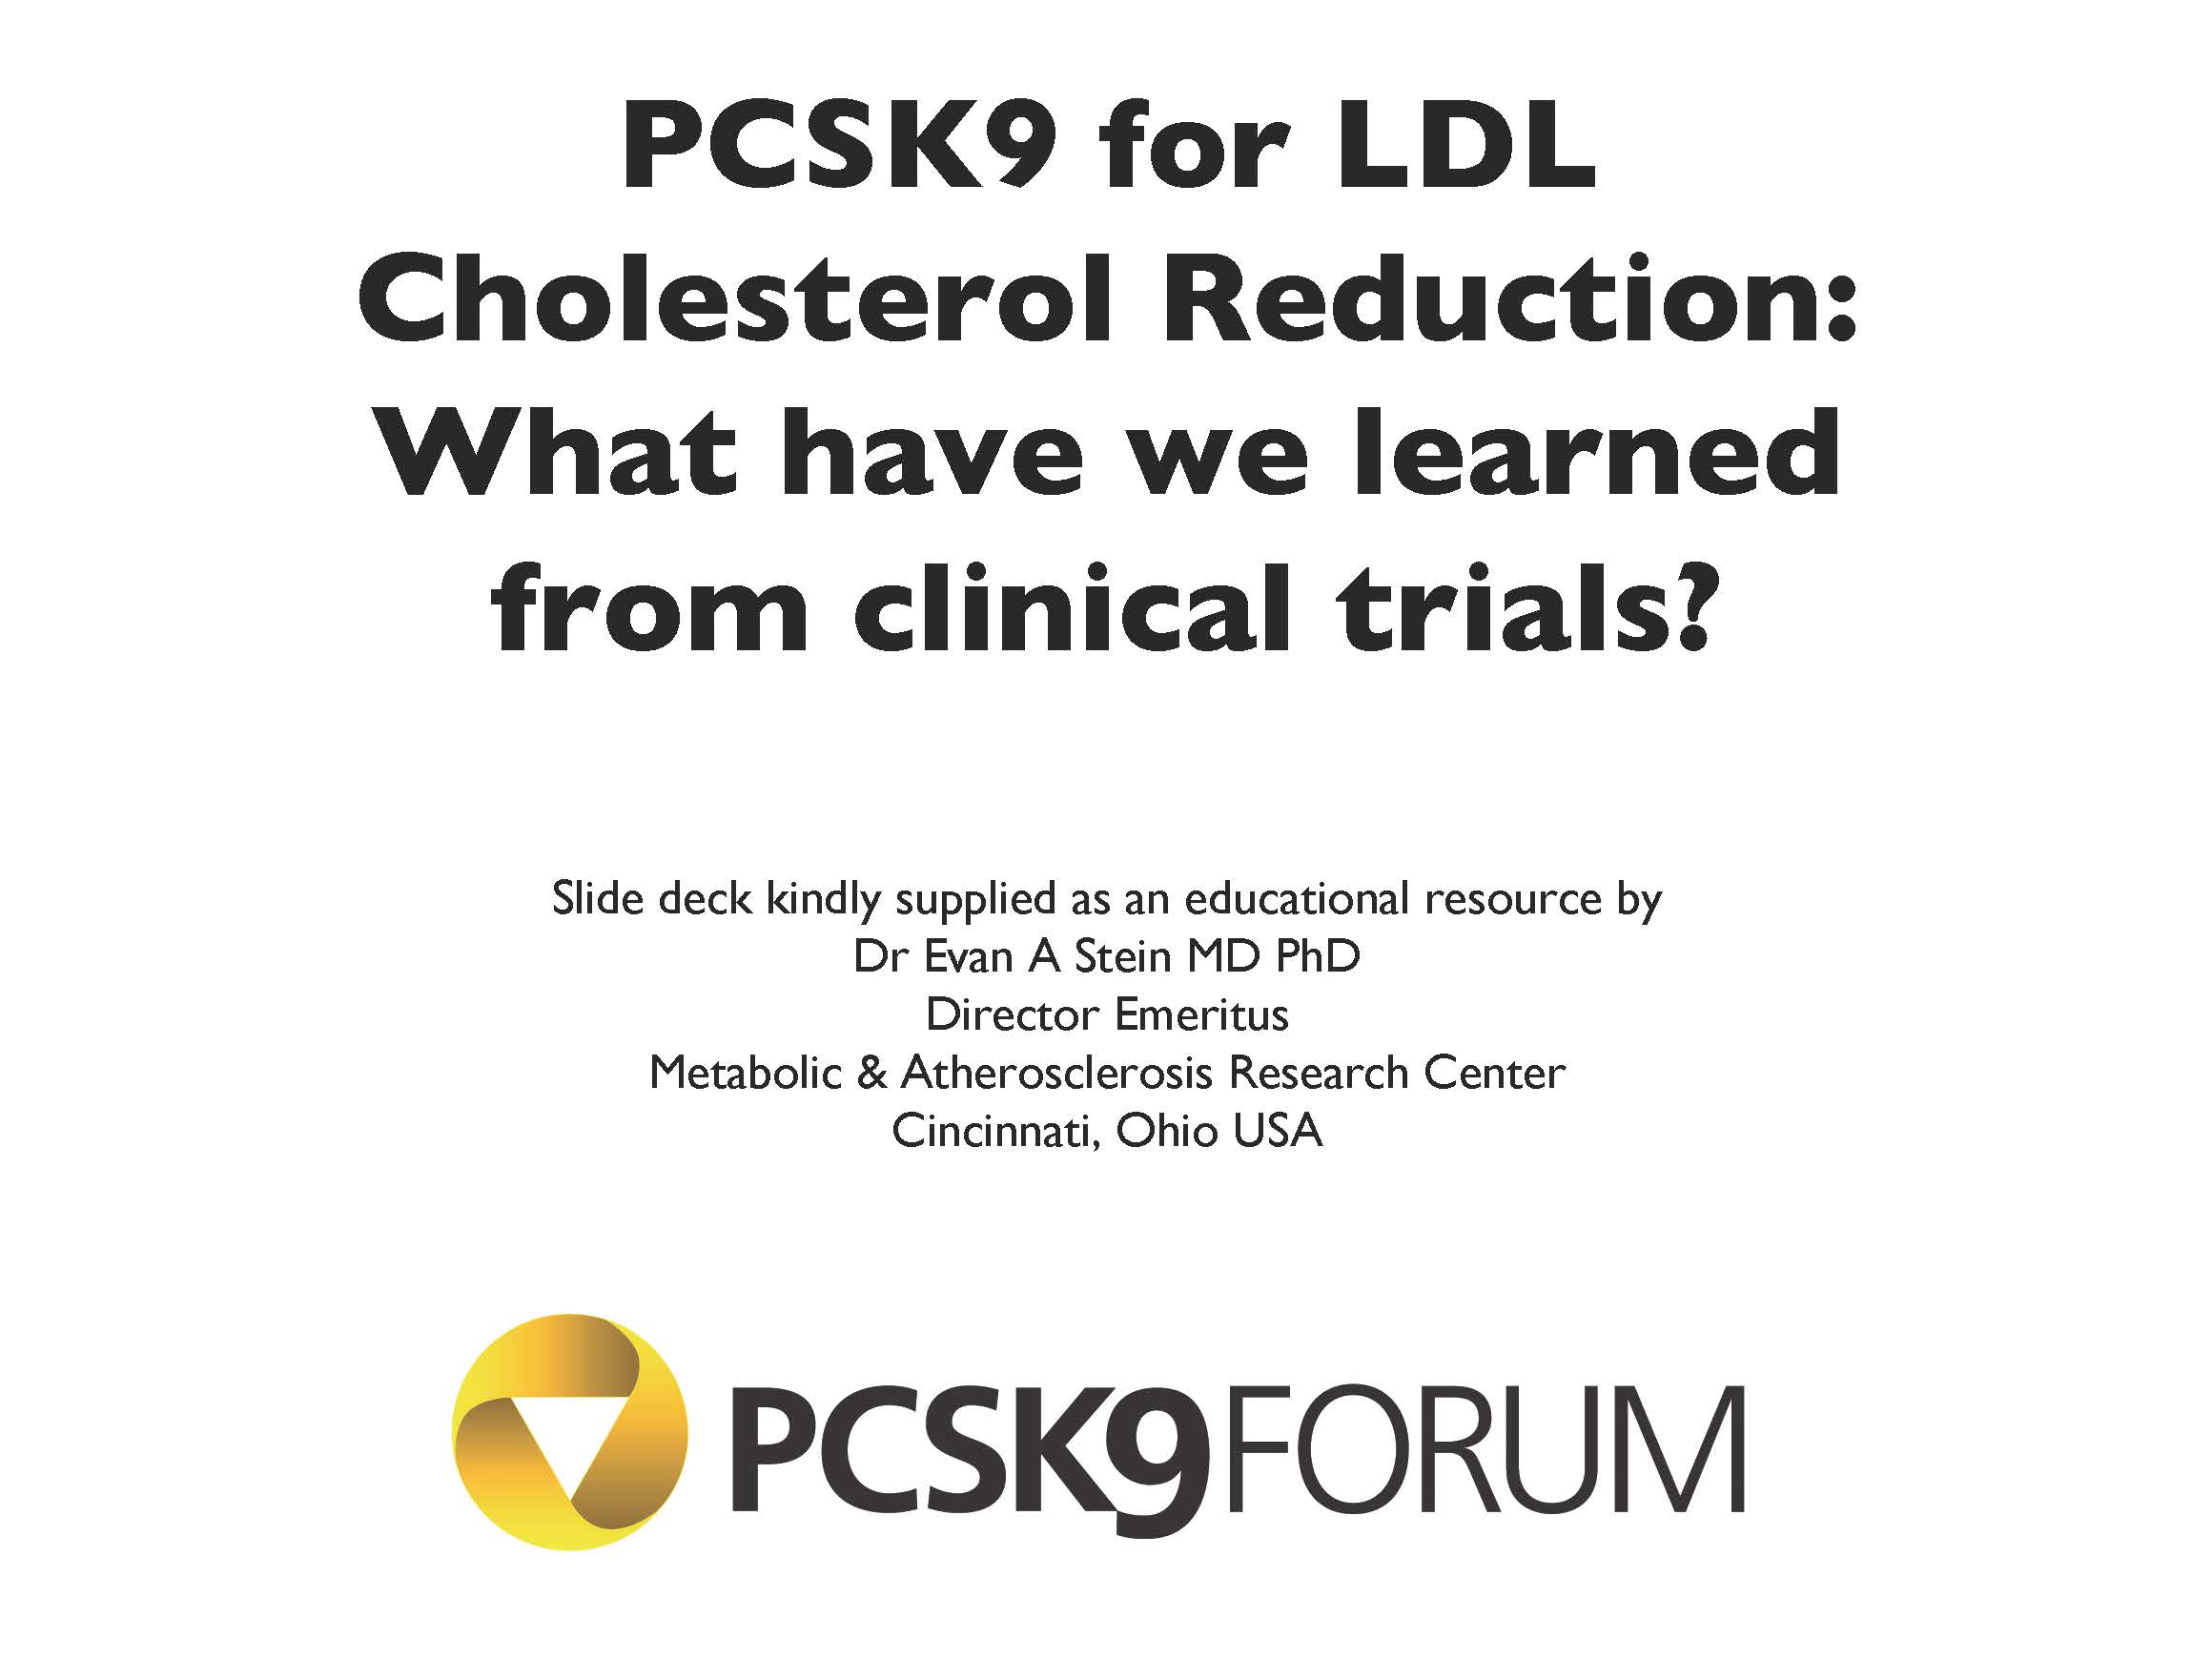 PCSK9 for LDL cholesterol reduction: what have we learned?